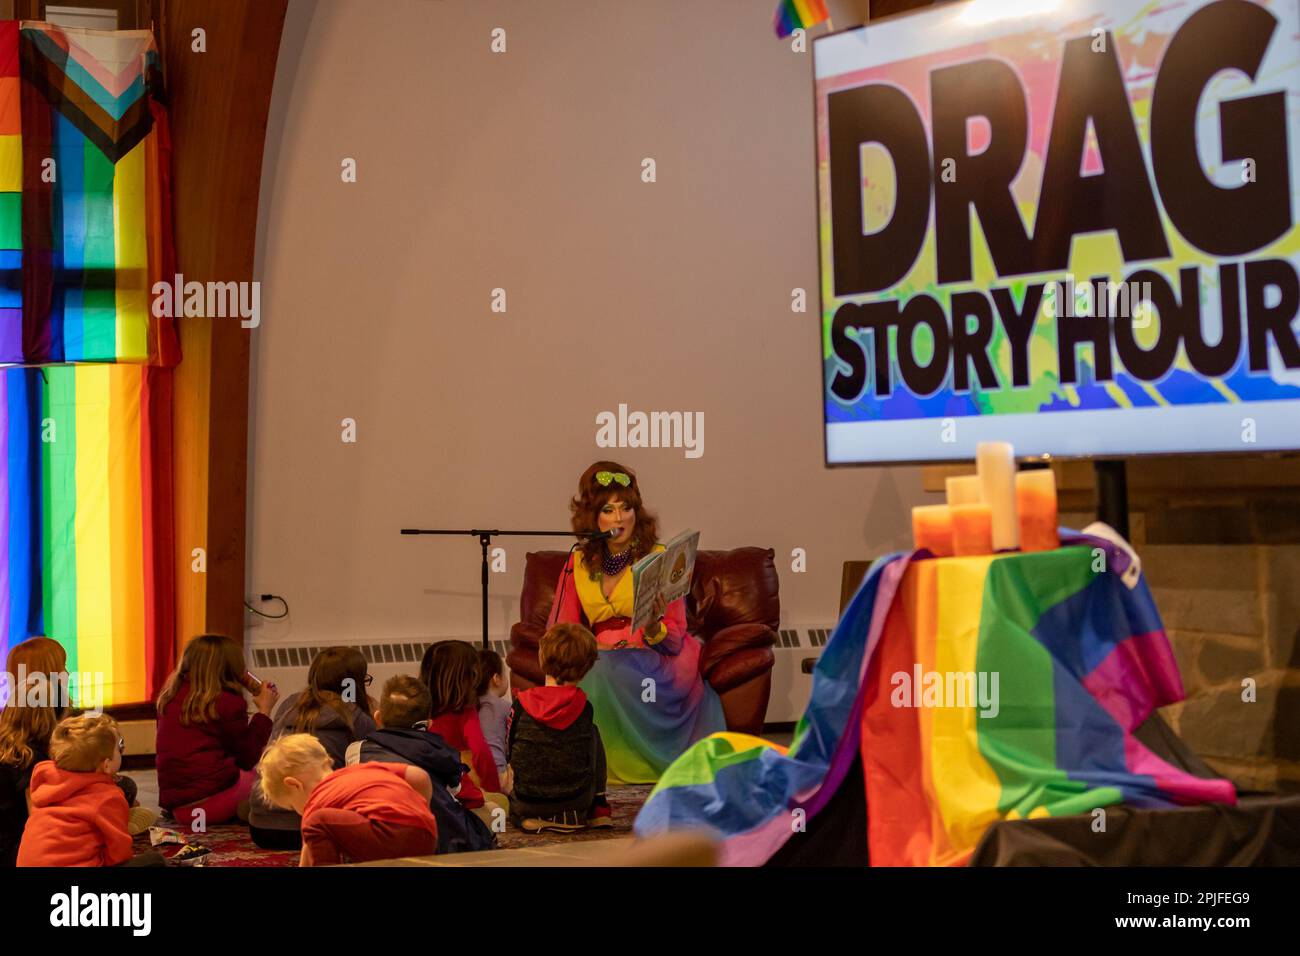 CHESTERLAND, OHIO - APRIL 1: A Drag performer reads a children's book at The Community Church of Chesterland's Drag Queen Story Hour on April 1, 2023 in Chesterland, Ohio. The heightened security at the church, which was reportedly firebombed a week before the event, comes on the heels of a recent spike of anti-drag demonstrations in Ohio communities and across the country.  (Photo by Michael Nigro/Sipa USA) Stock Photo